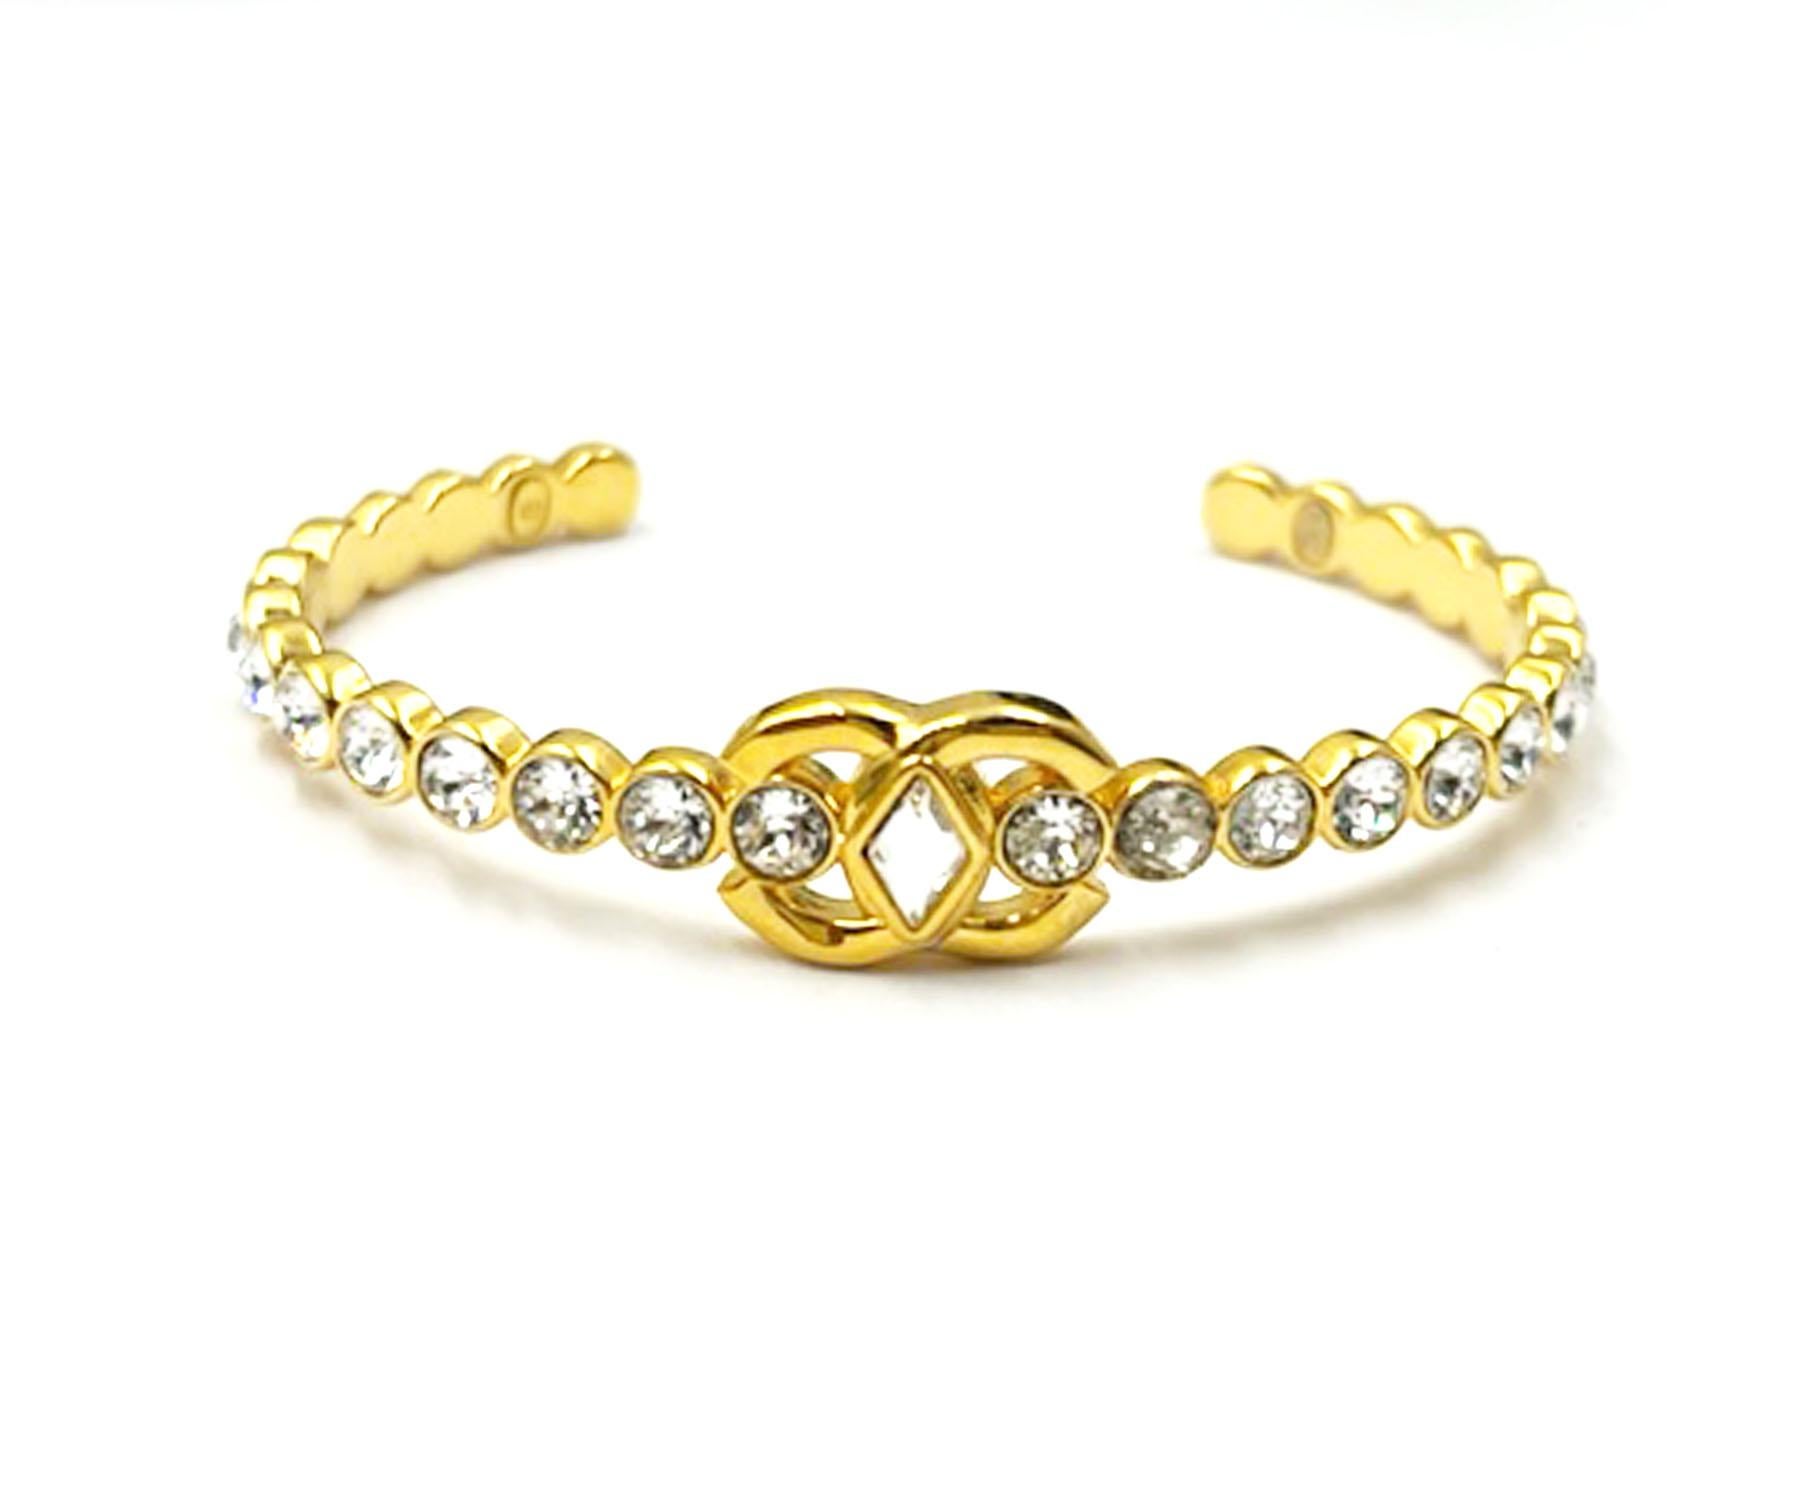 Chanel Gold Plated CC Marquise Round Crystal Cuff Bracelet

*Marked 23
*Made in Italy
*Comes with the original box and pouch

-It is approximately 2.25